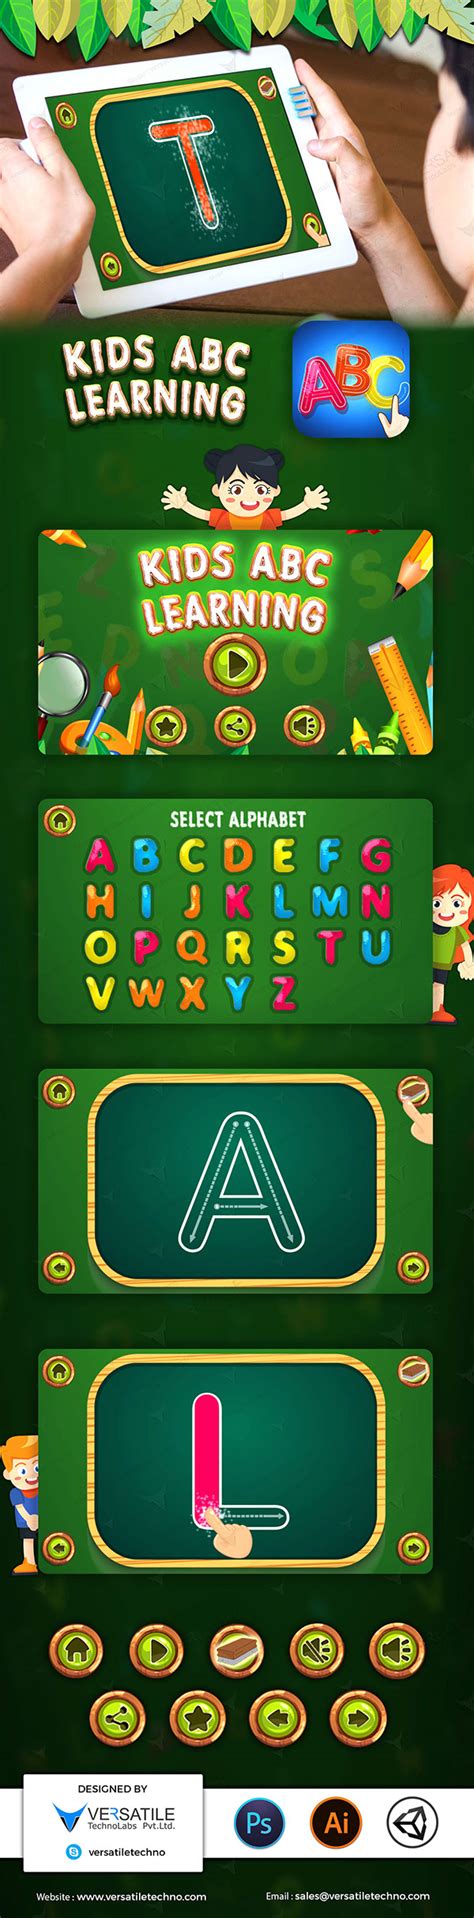 Alphabet Tracing and Phonics Game development, Kids Educational Game Development | Learning abc ...